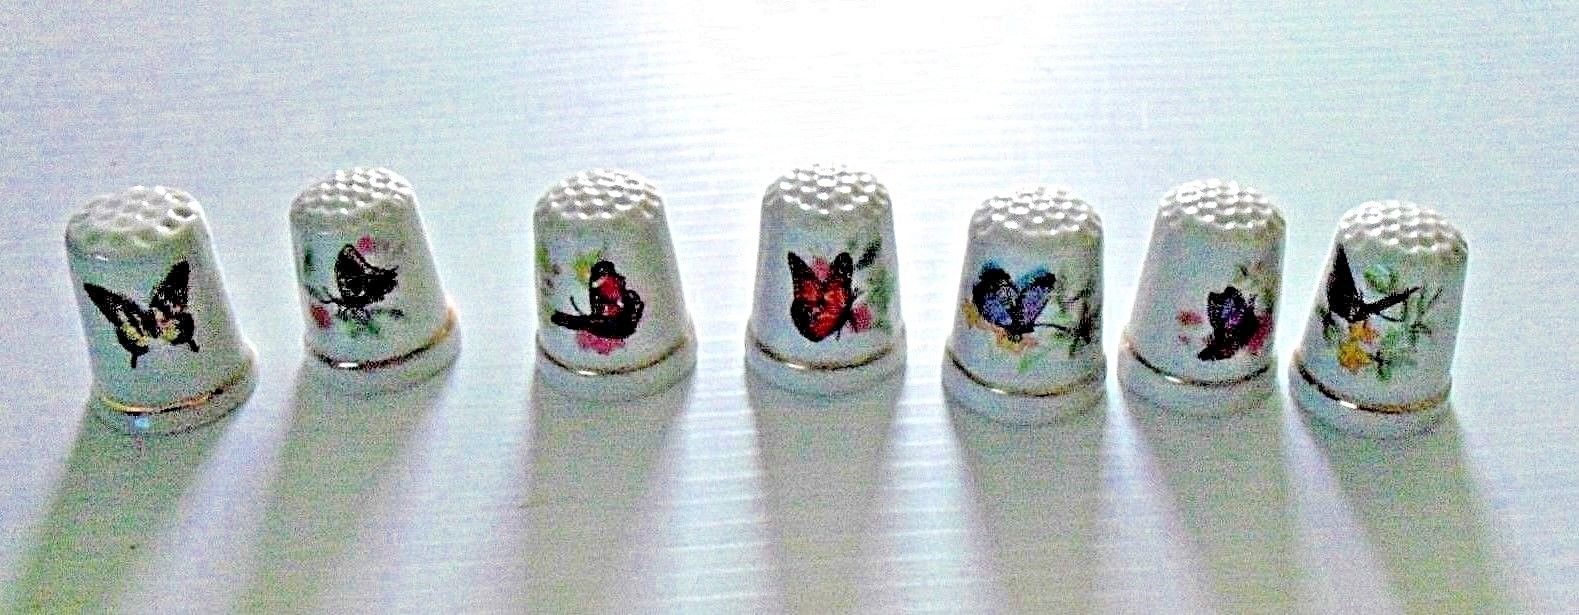 Lot of 7 Porcelain Thimble with Butterfly Pictured On It